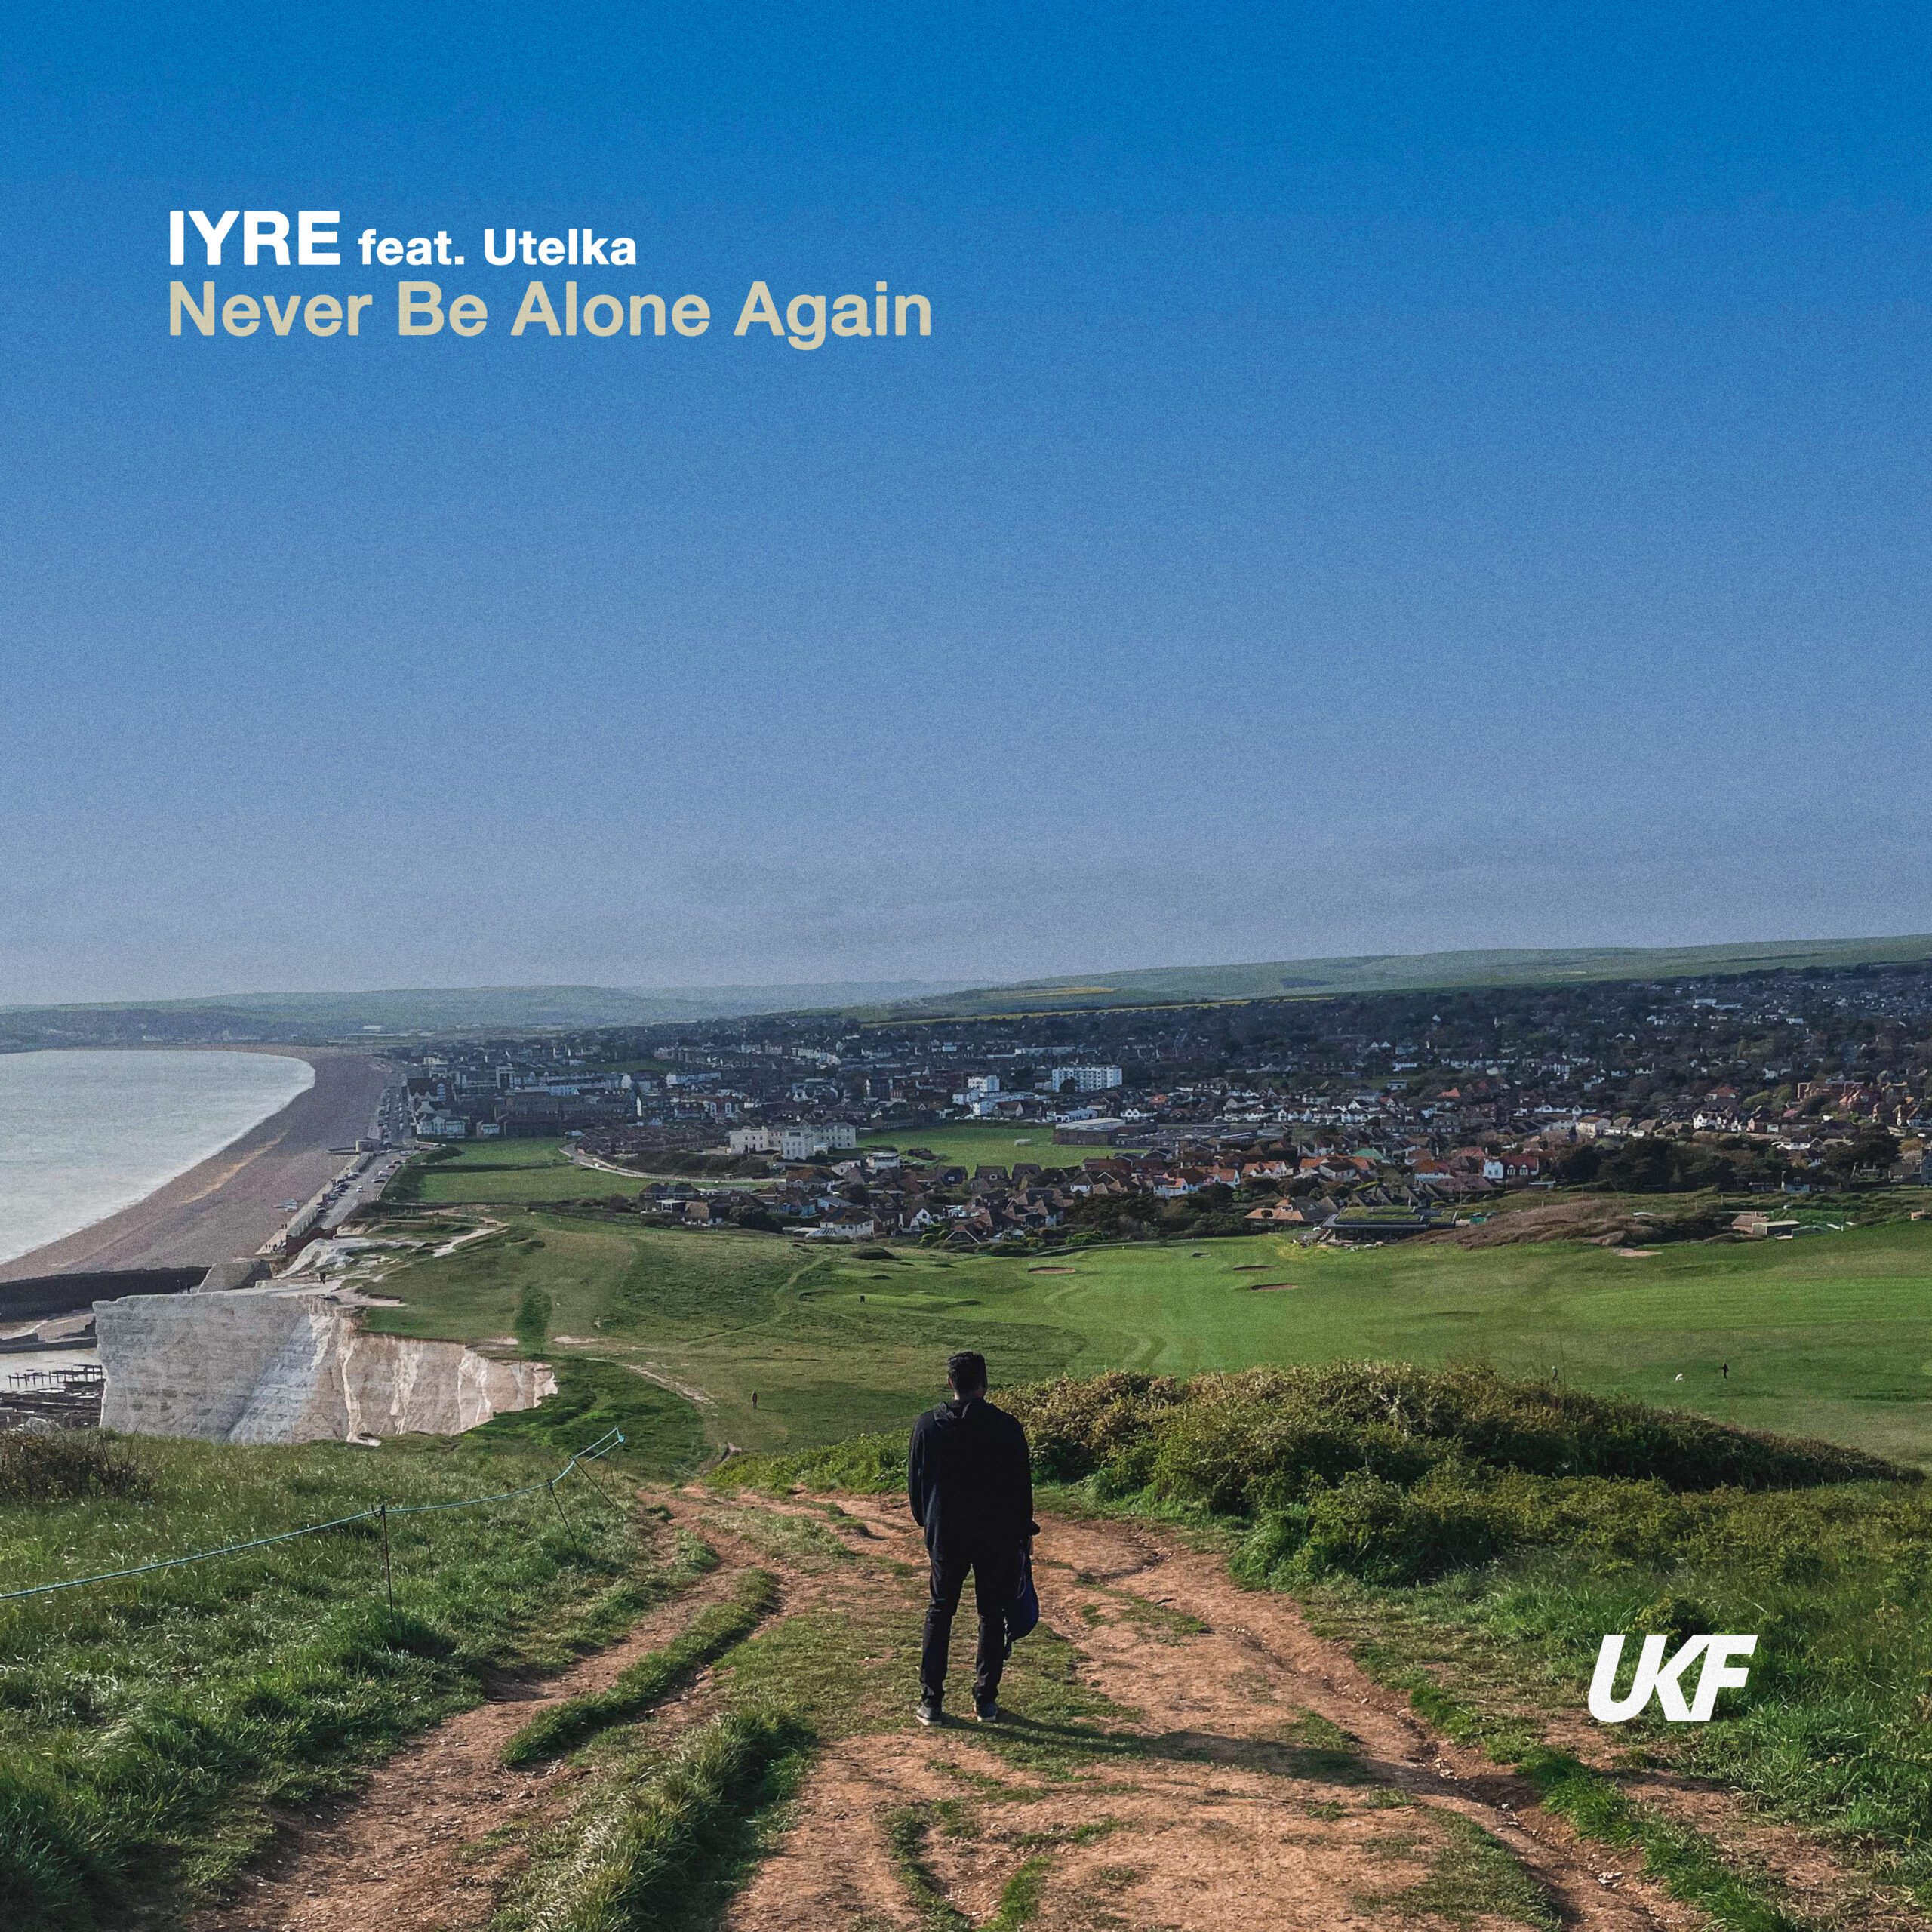 IYRE – Never Be Alone Again (feat. Utelka)